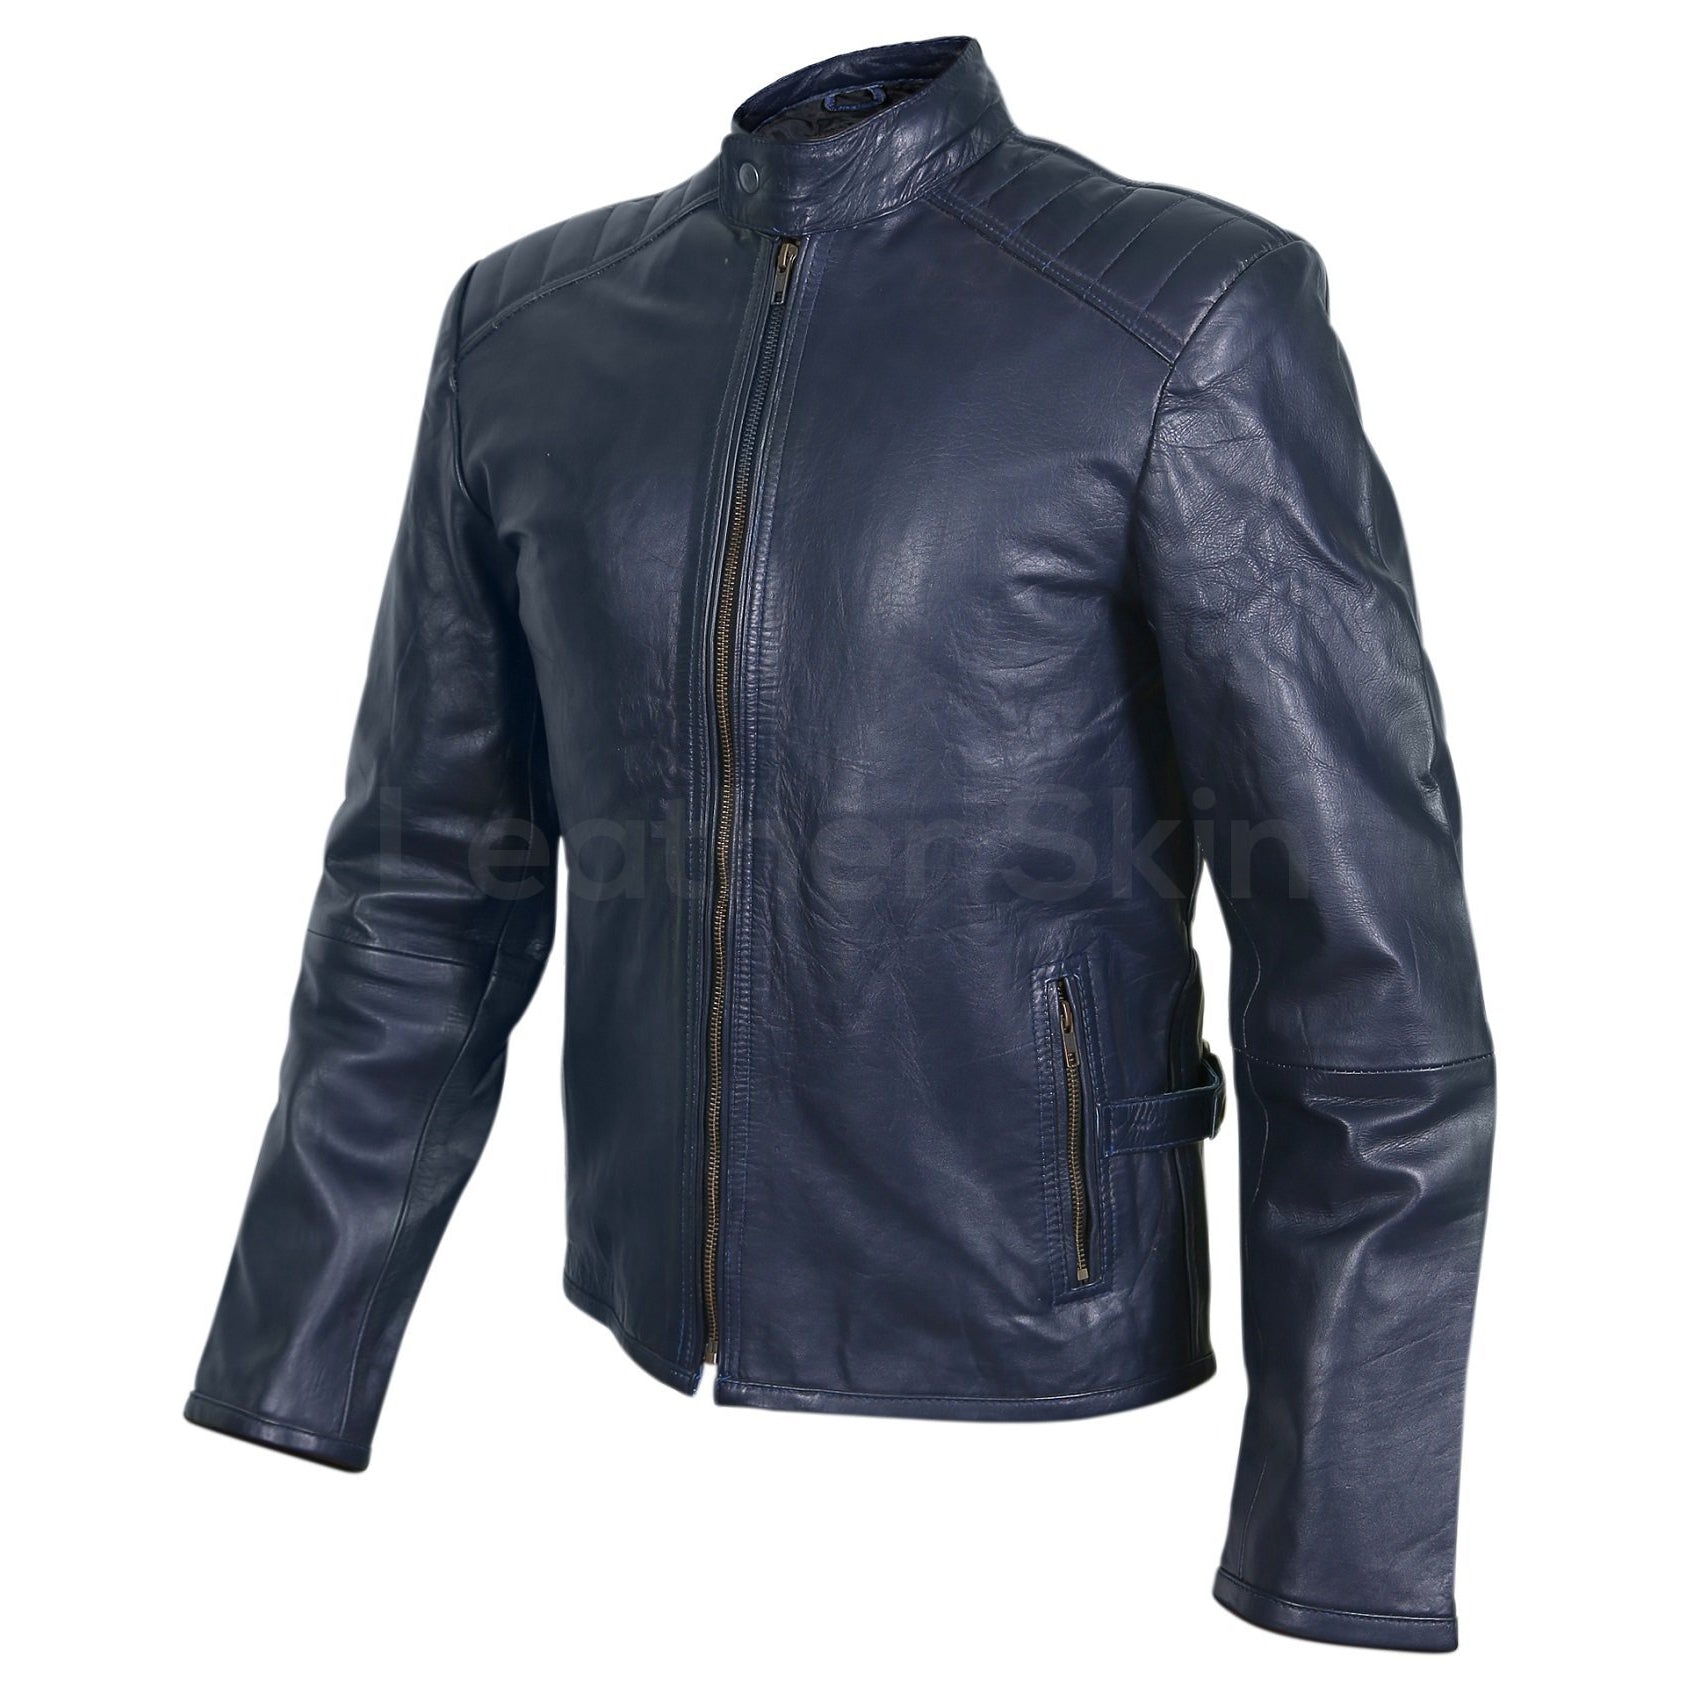 How to Rock a Blue Leather Jacket Outfit for Women - Leather Skin Shop